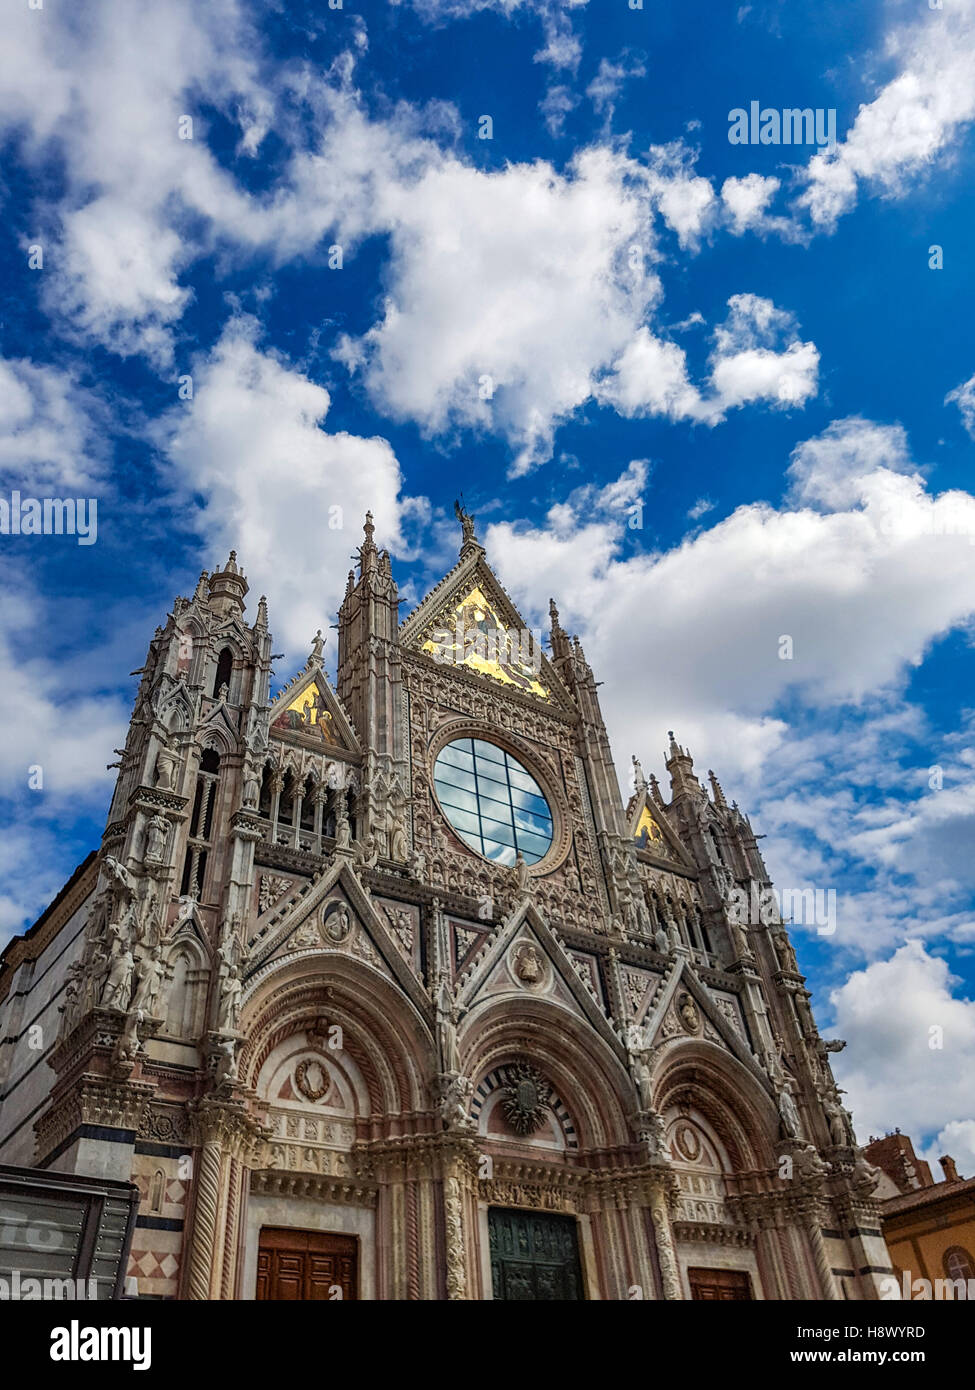 Exteriors and architectural details of the Duomo, Siena cathedral, Italy Stock Photo